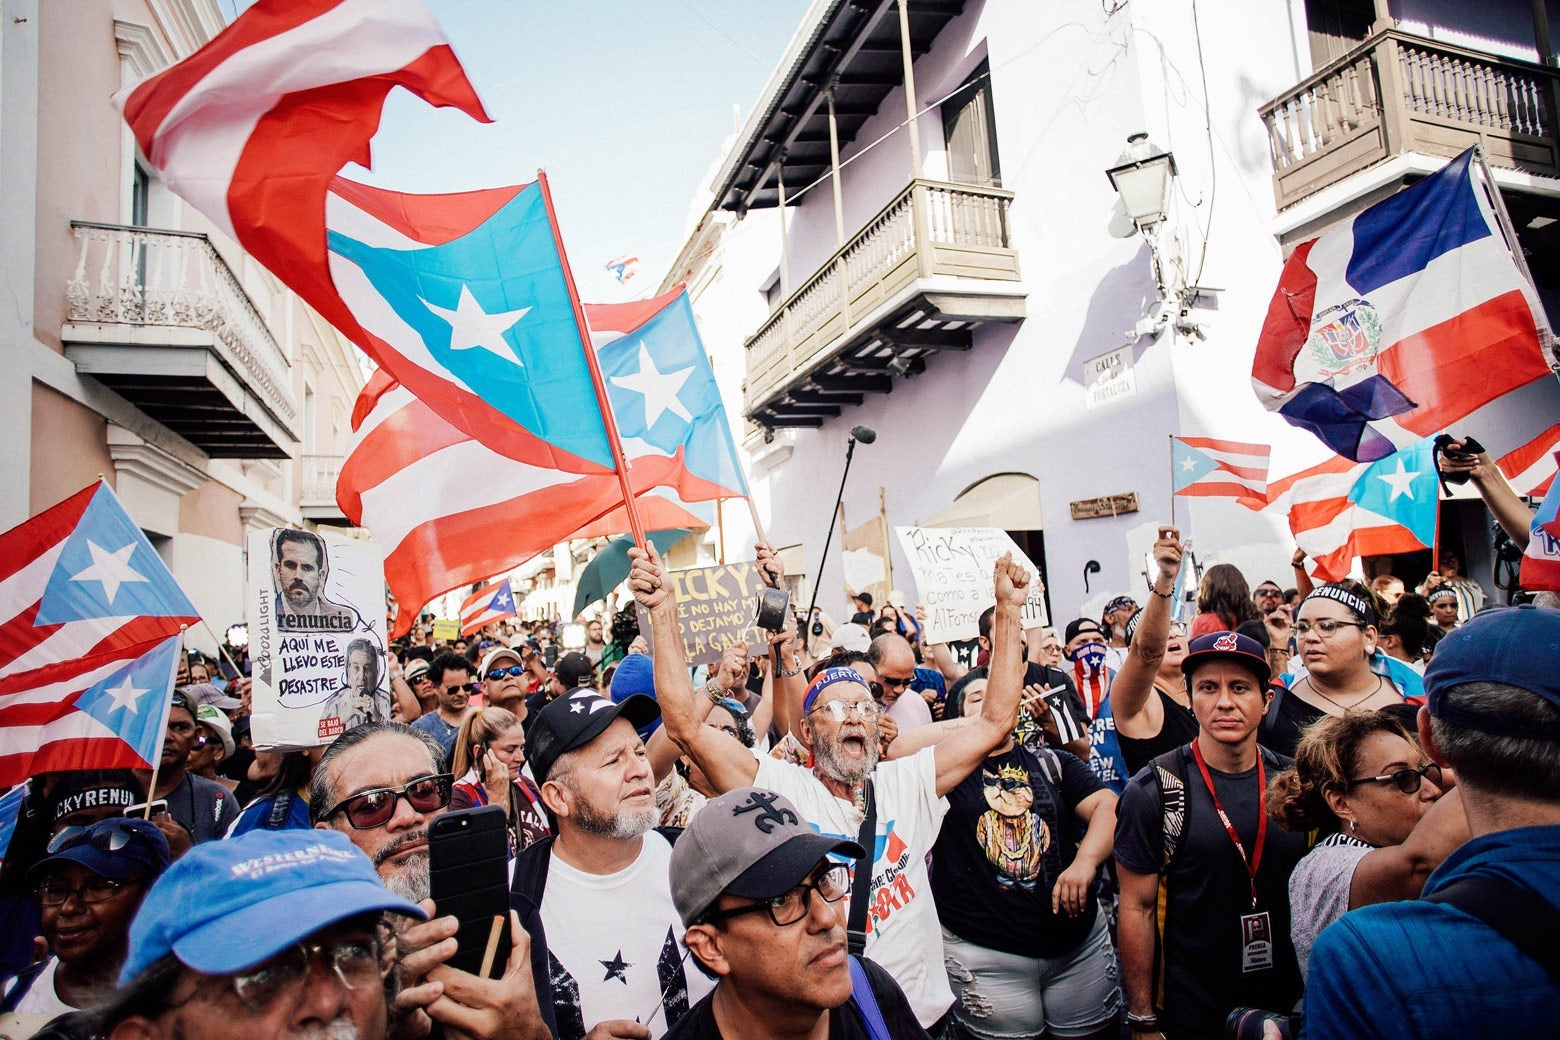 Demonstrators protest in front of the mansion of Puerto Rico's governor.